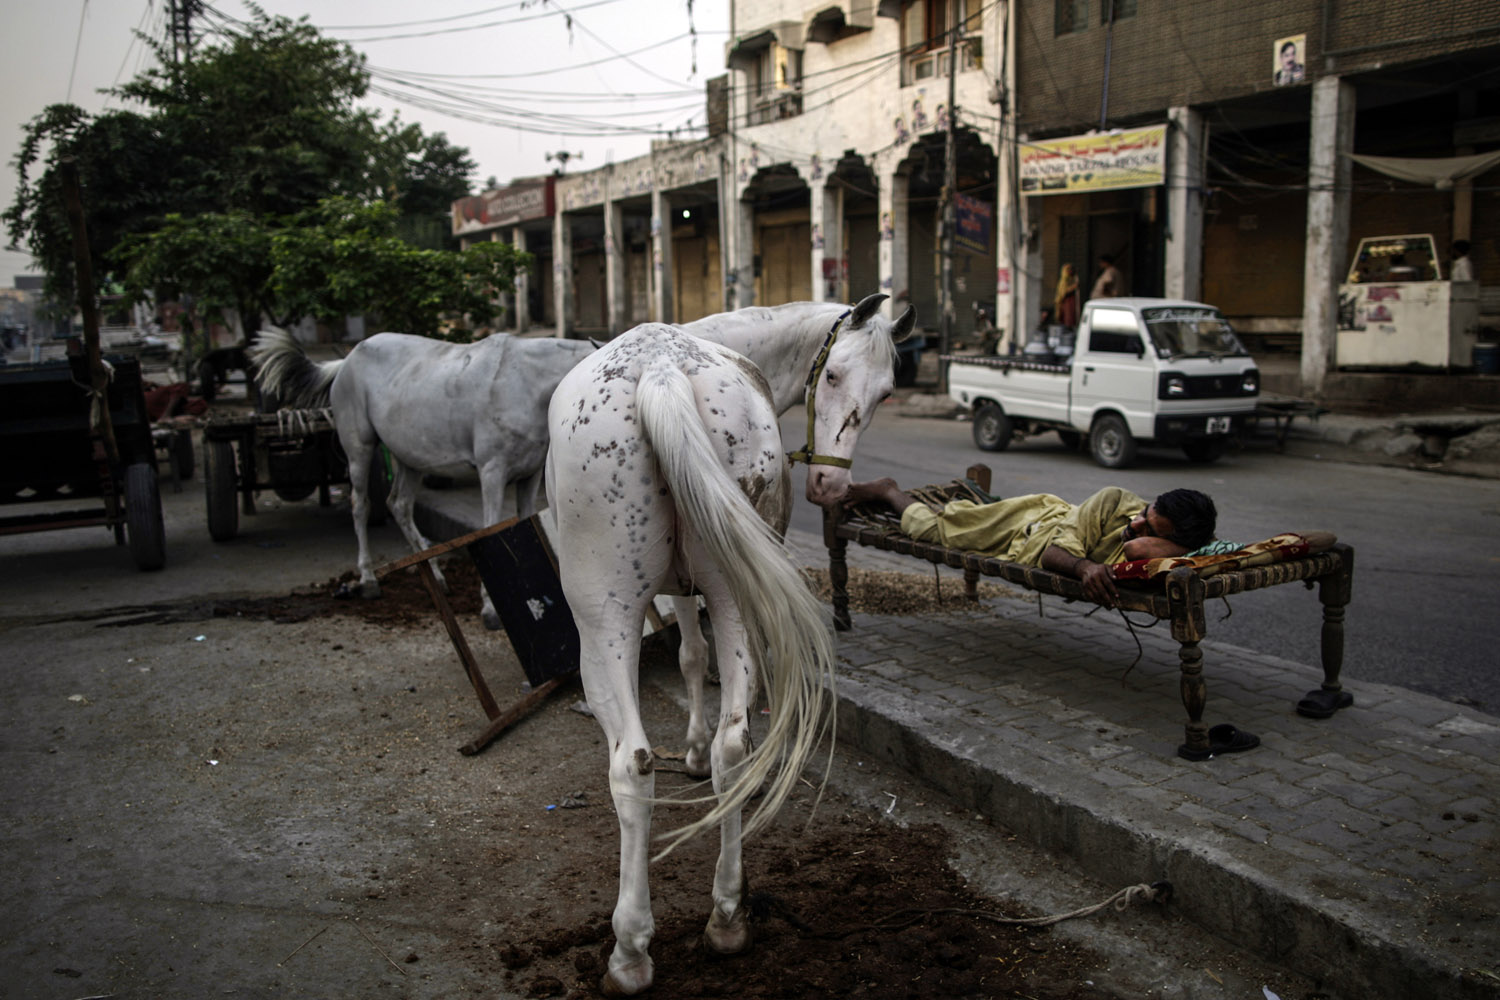 June 10, 2013. A horse for rent stands next to his owner as he sleeps on a bed on a sidewalk in a street in Rawalpindi, Pakistan.